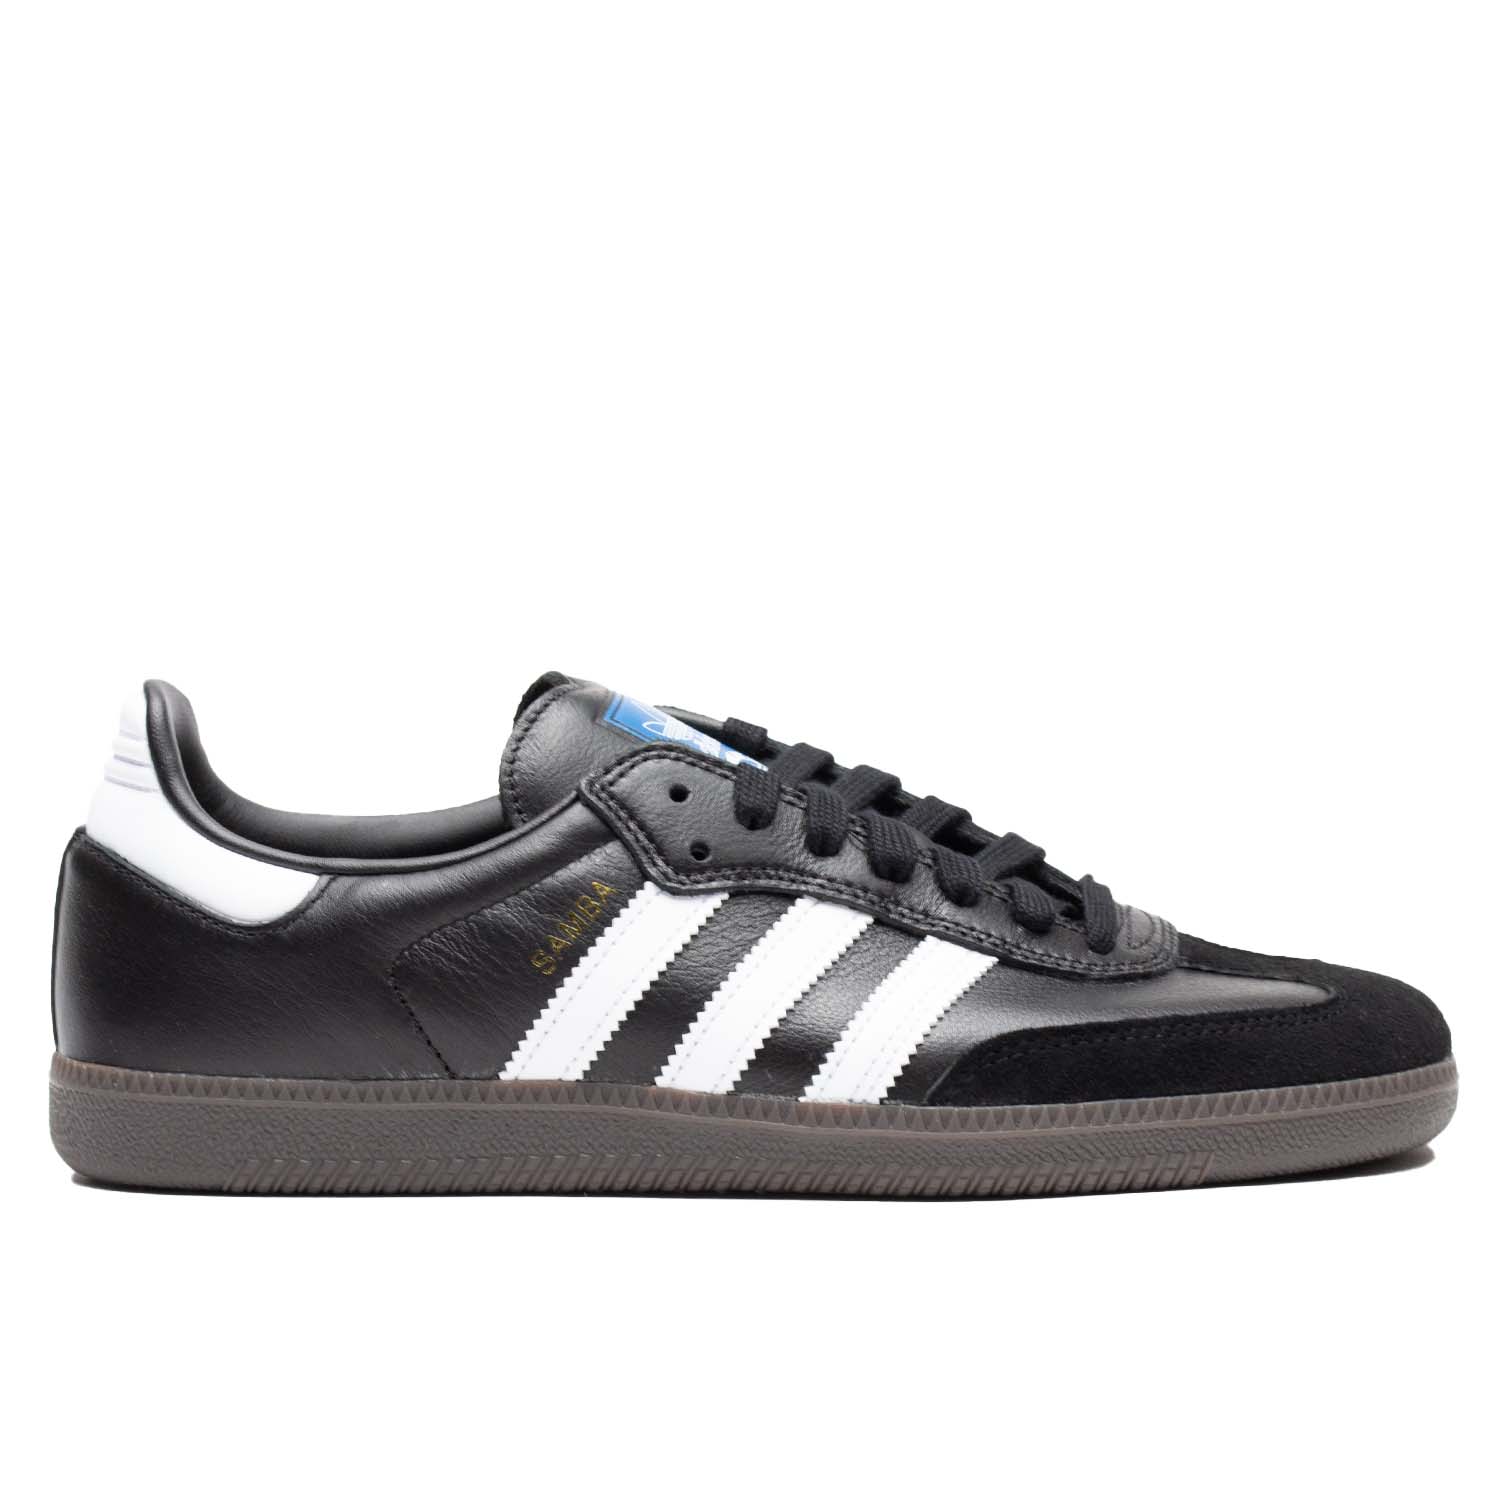 Black leather Adidas skateboarding shoe with white leather stripes and brown rubber sole. Suede toe cap.